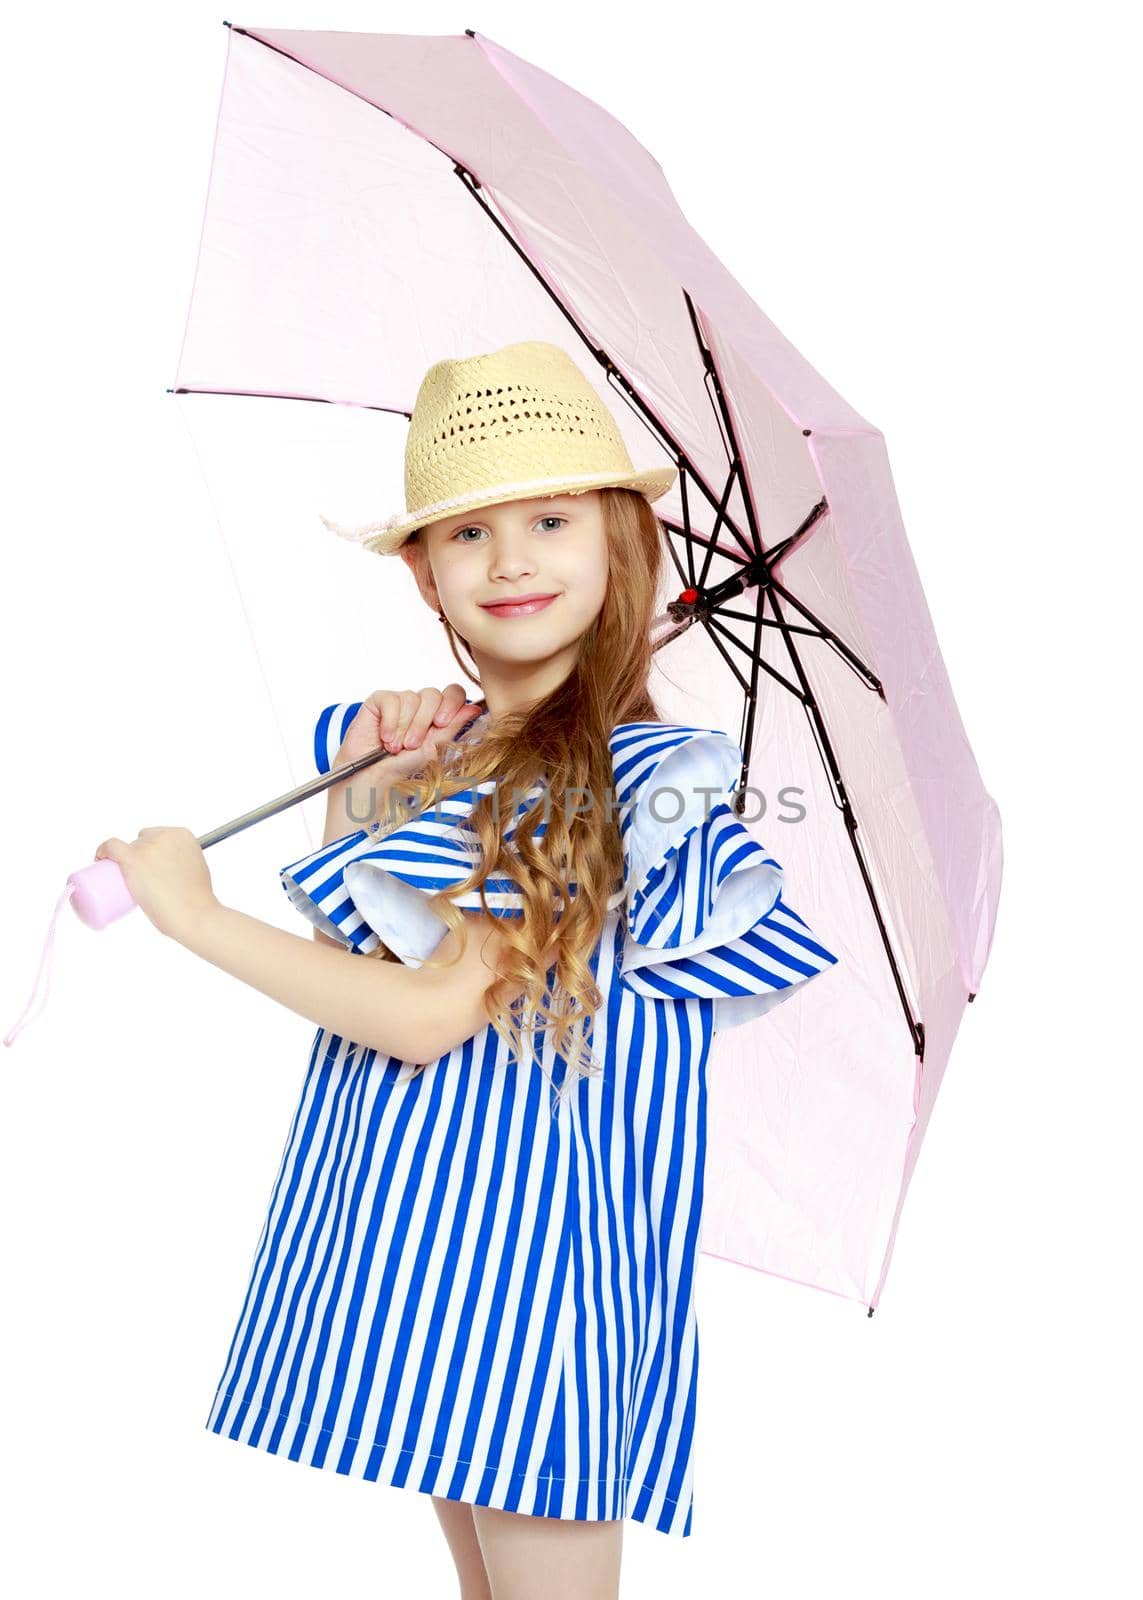 A stylish little girl with long blond hair in a very short, striped, summer blue dress and a straw hat.With a pink umbrella behind her shoulders.Isolated on white background.